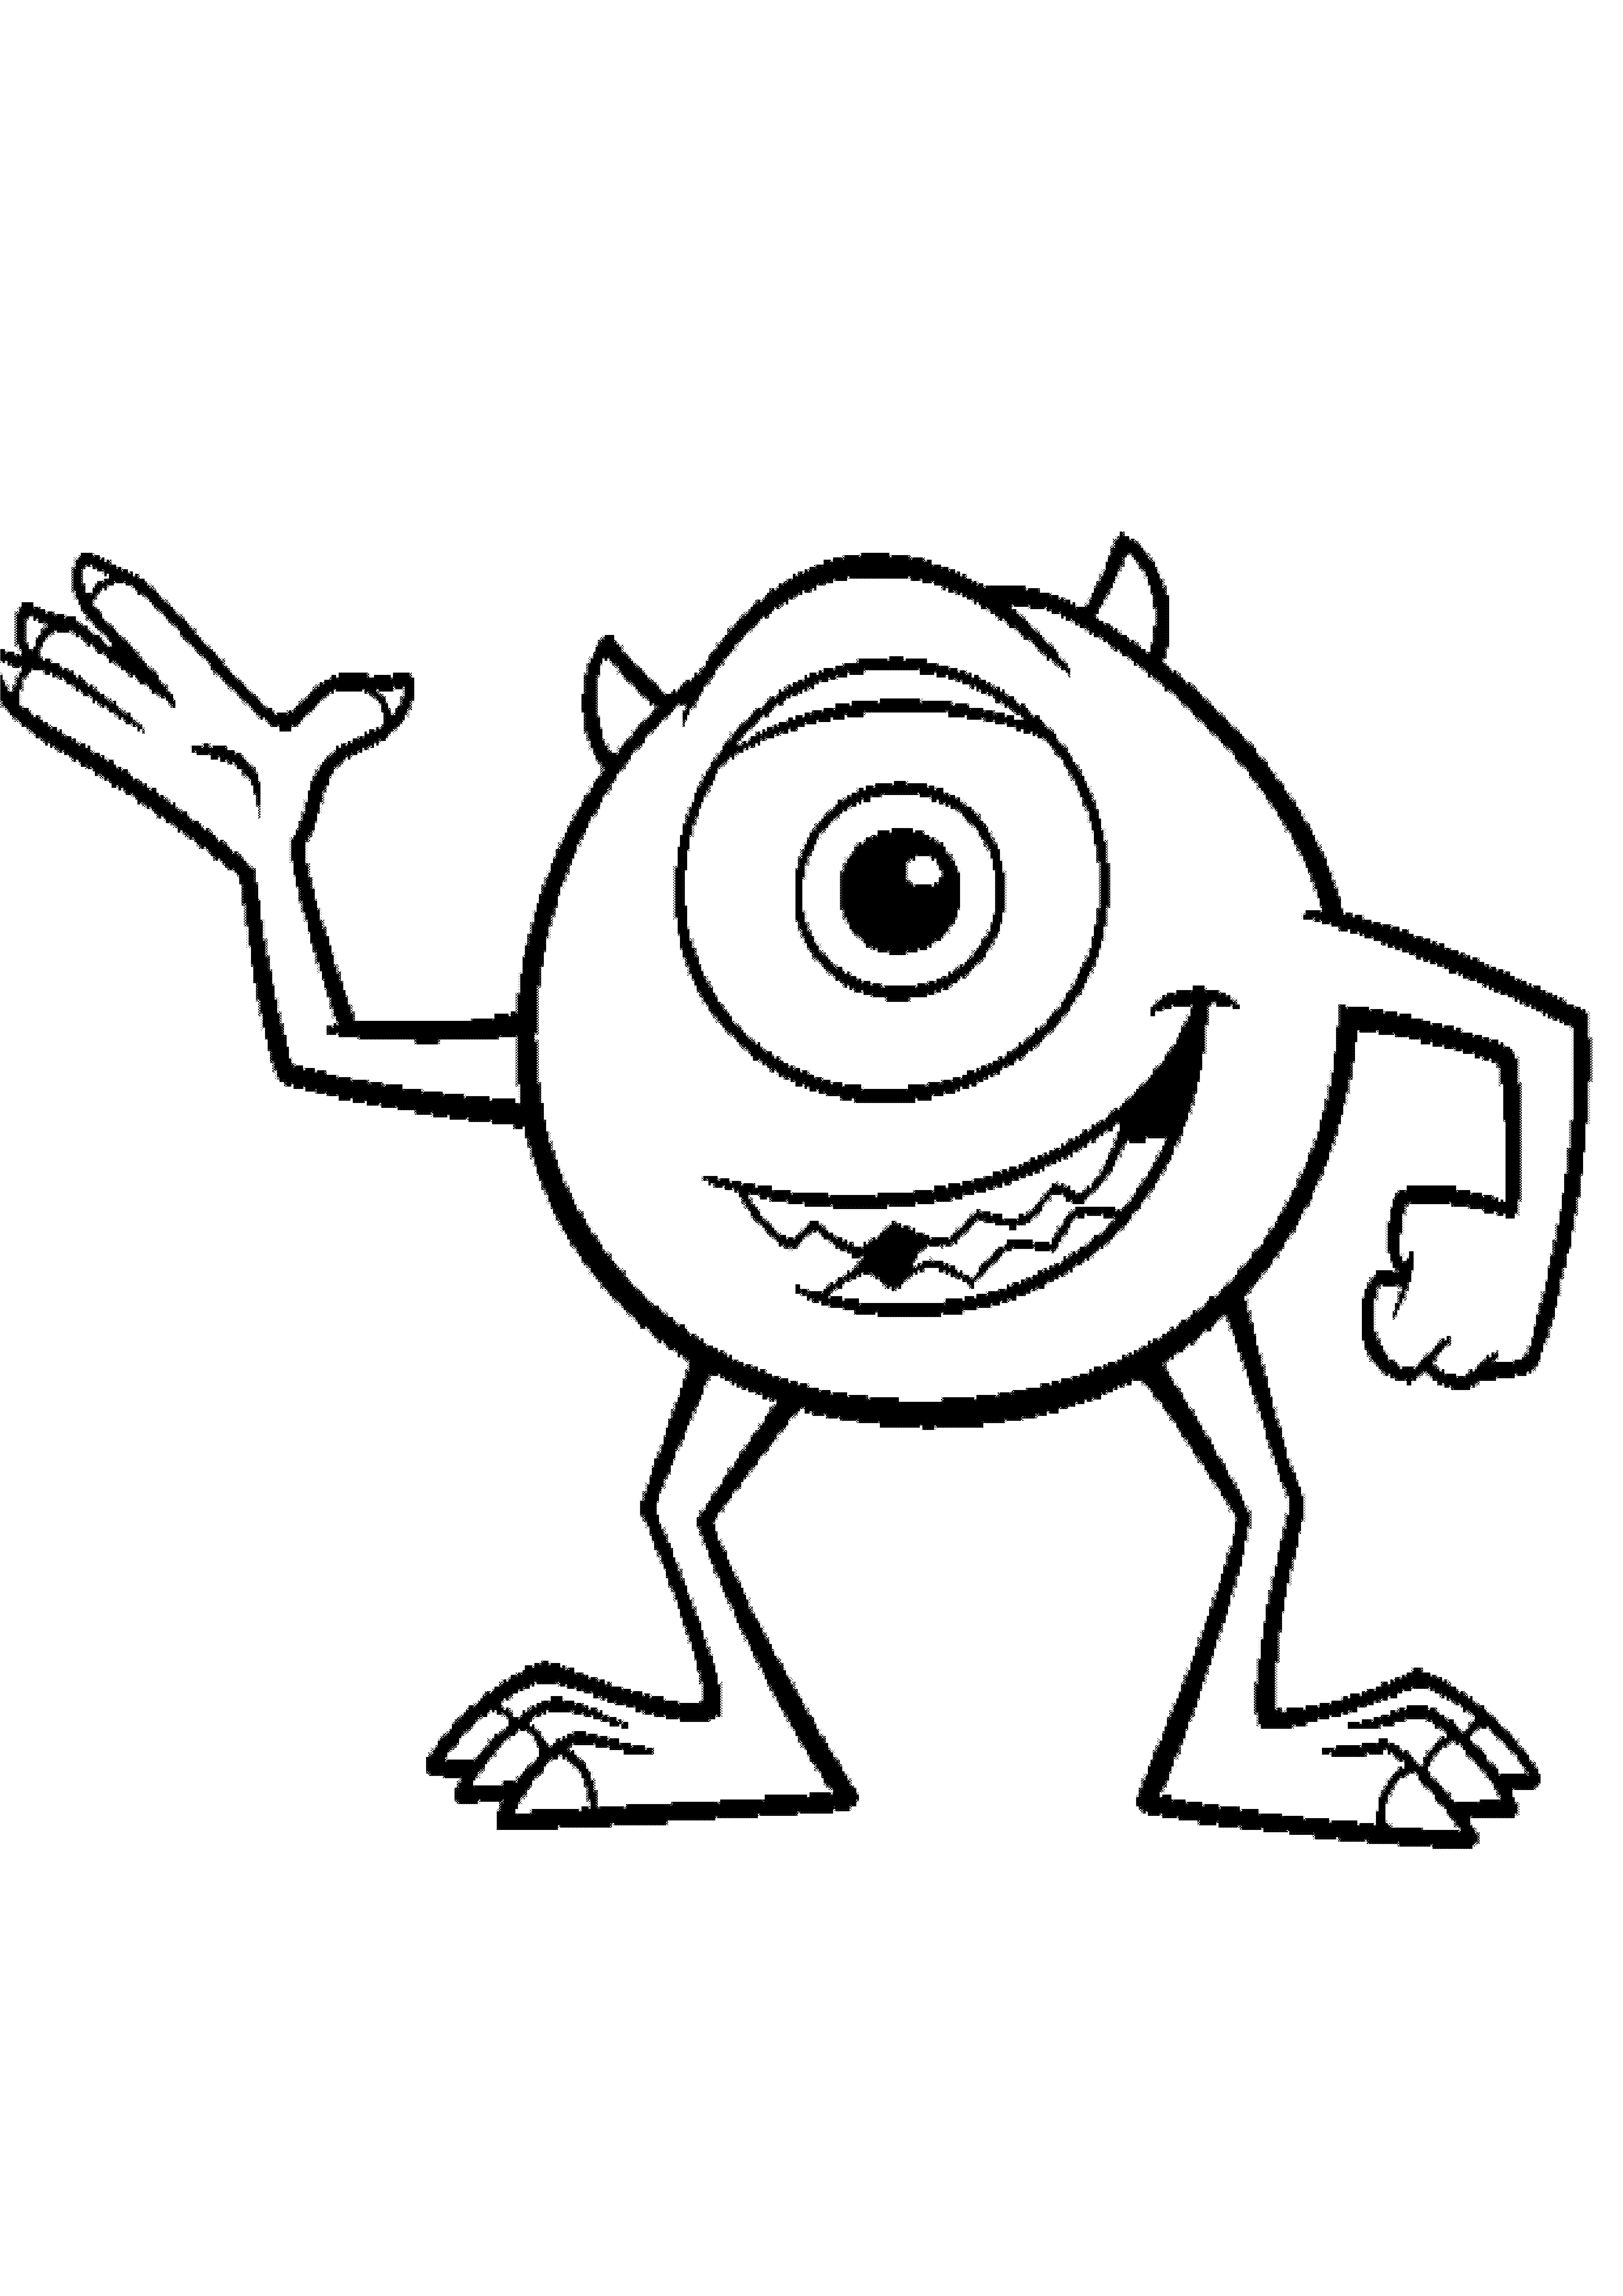 monsters inc coloring page fun coloring pages monsters university coloring pages page monsters inc coloring 